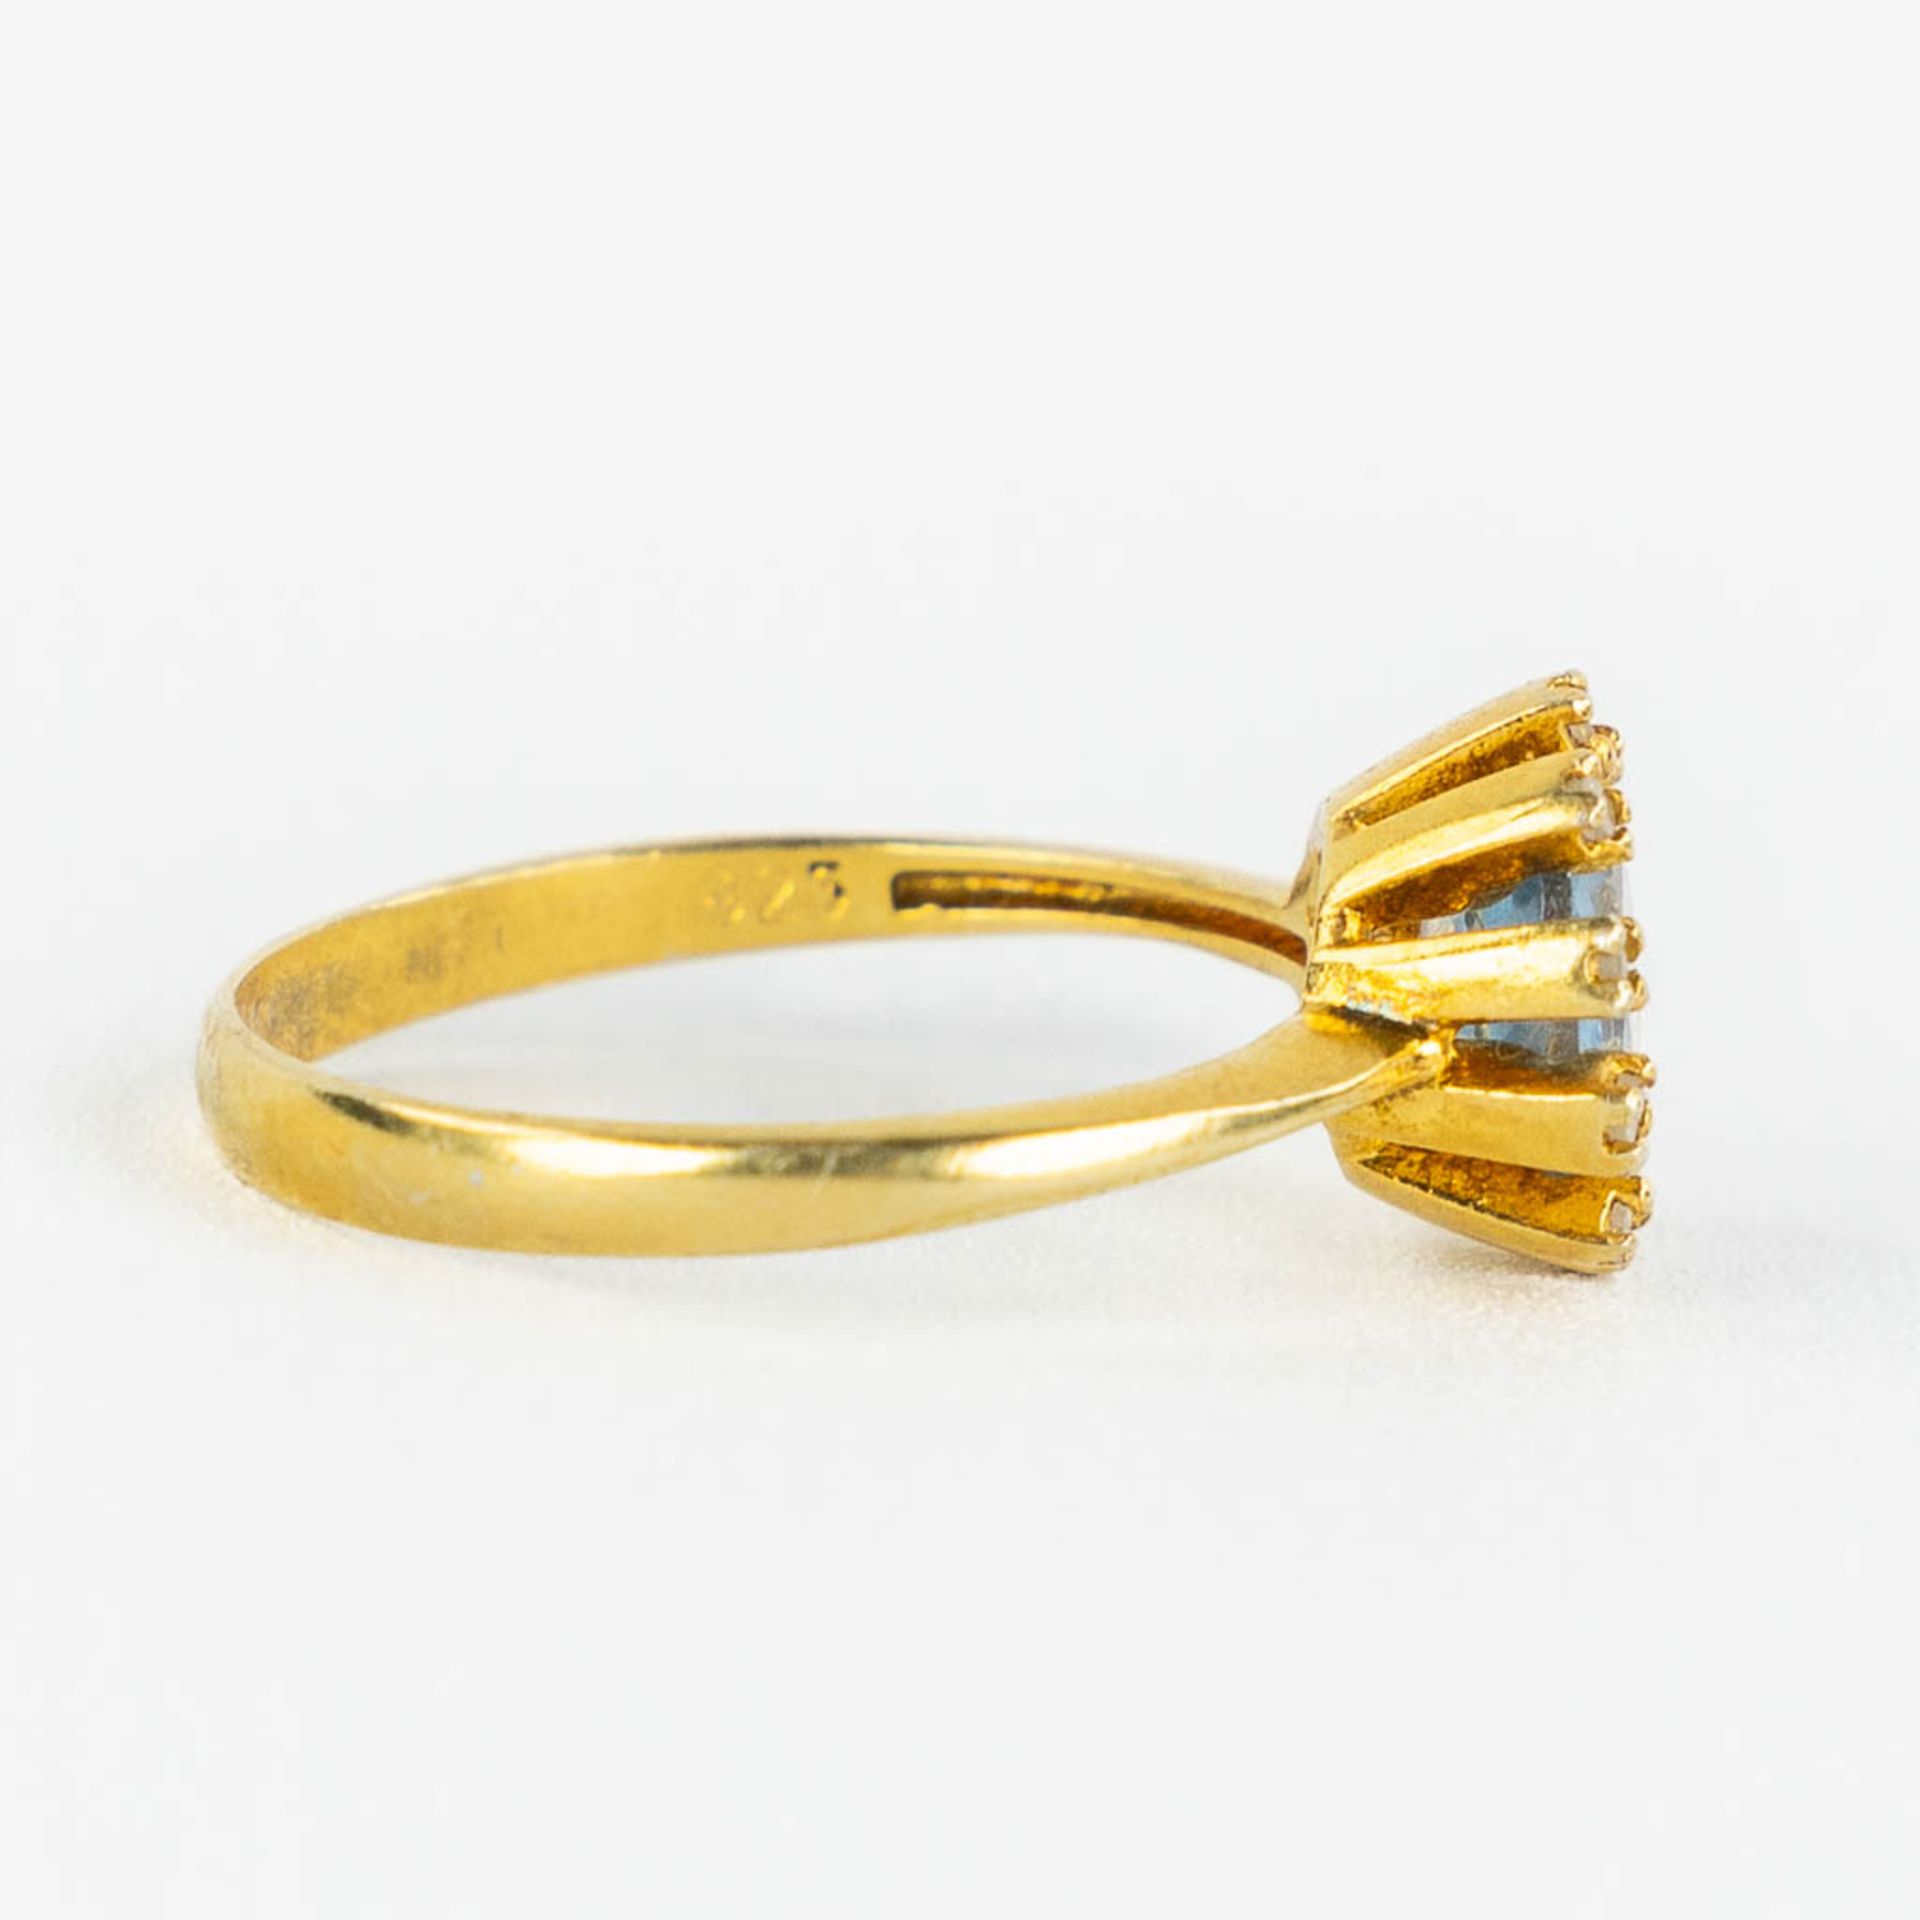 A ring, gilt silver with a cut topaaz, old cut diamonds. 2,48g. Ring size 59. - Image 6 of 9